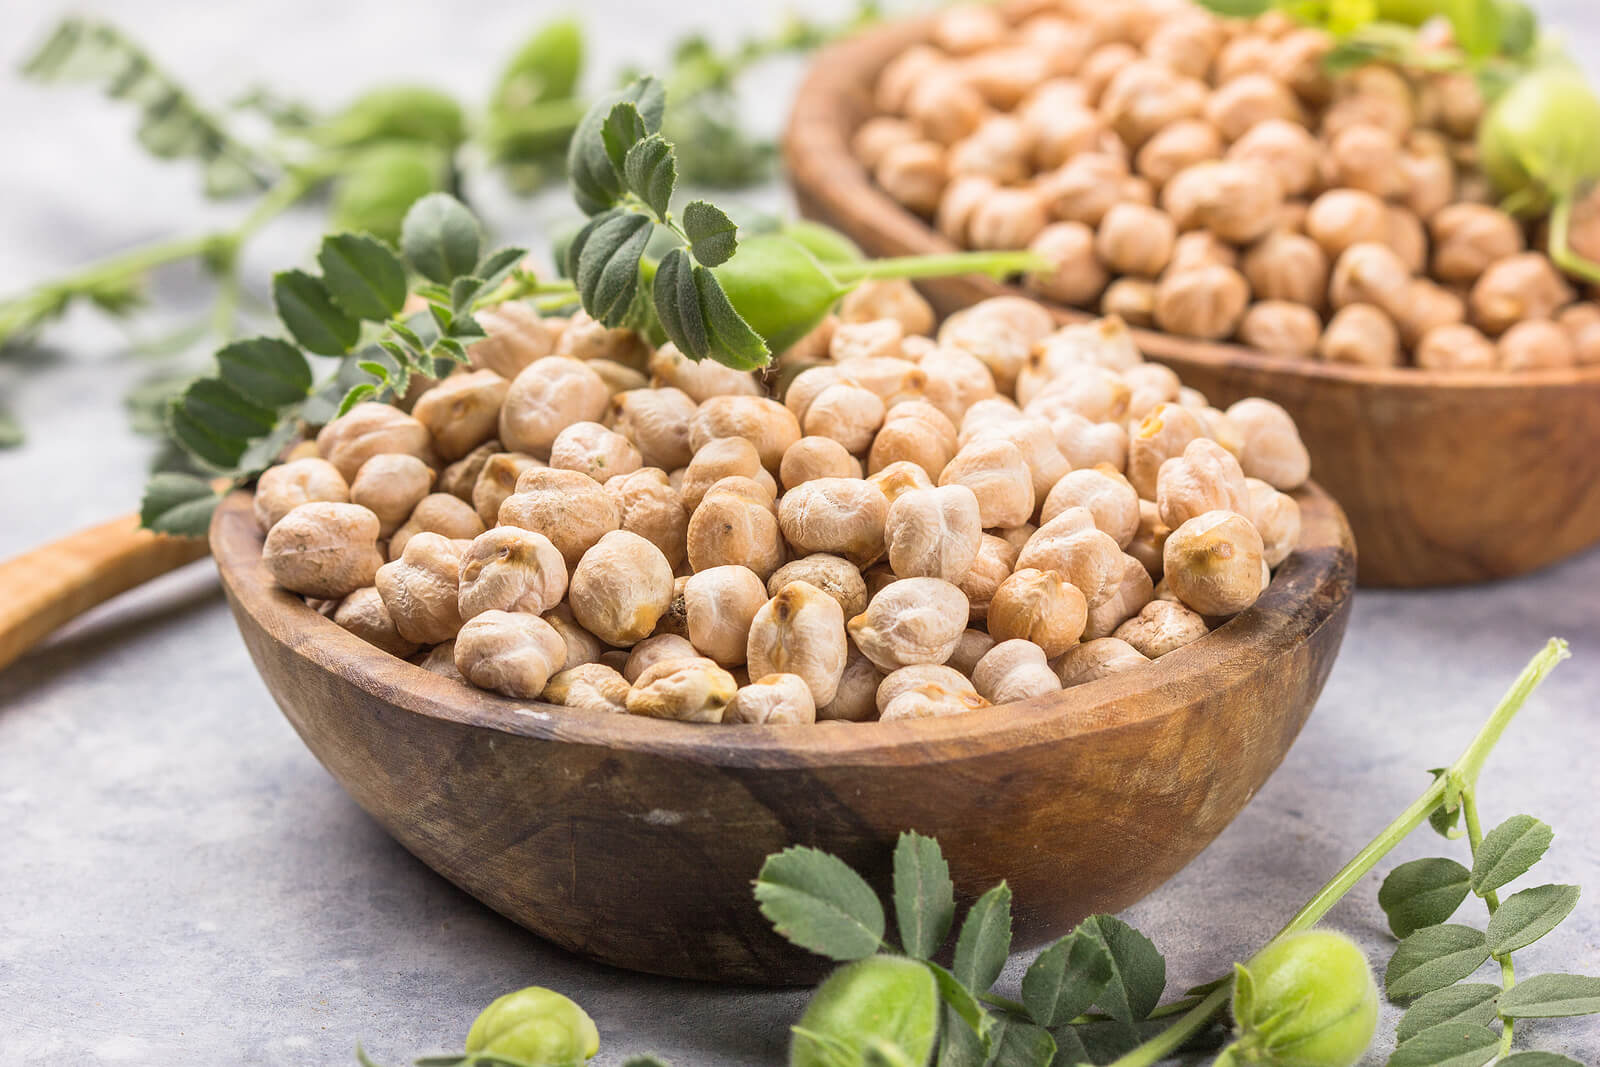 Magnesium-rich foods include chickpeas